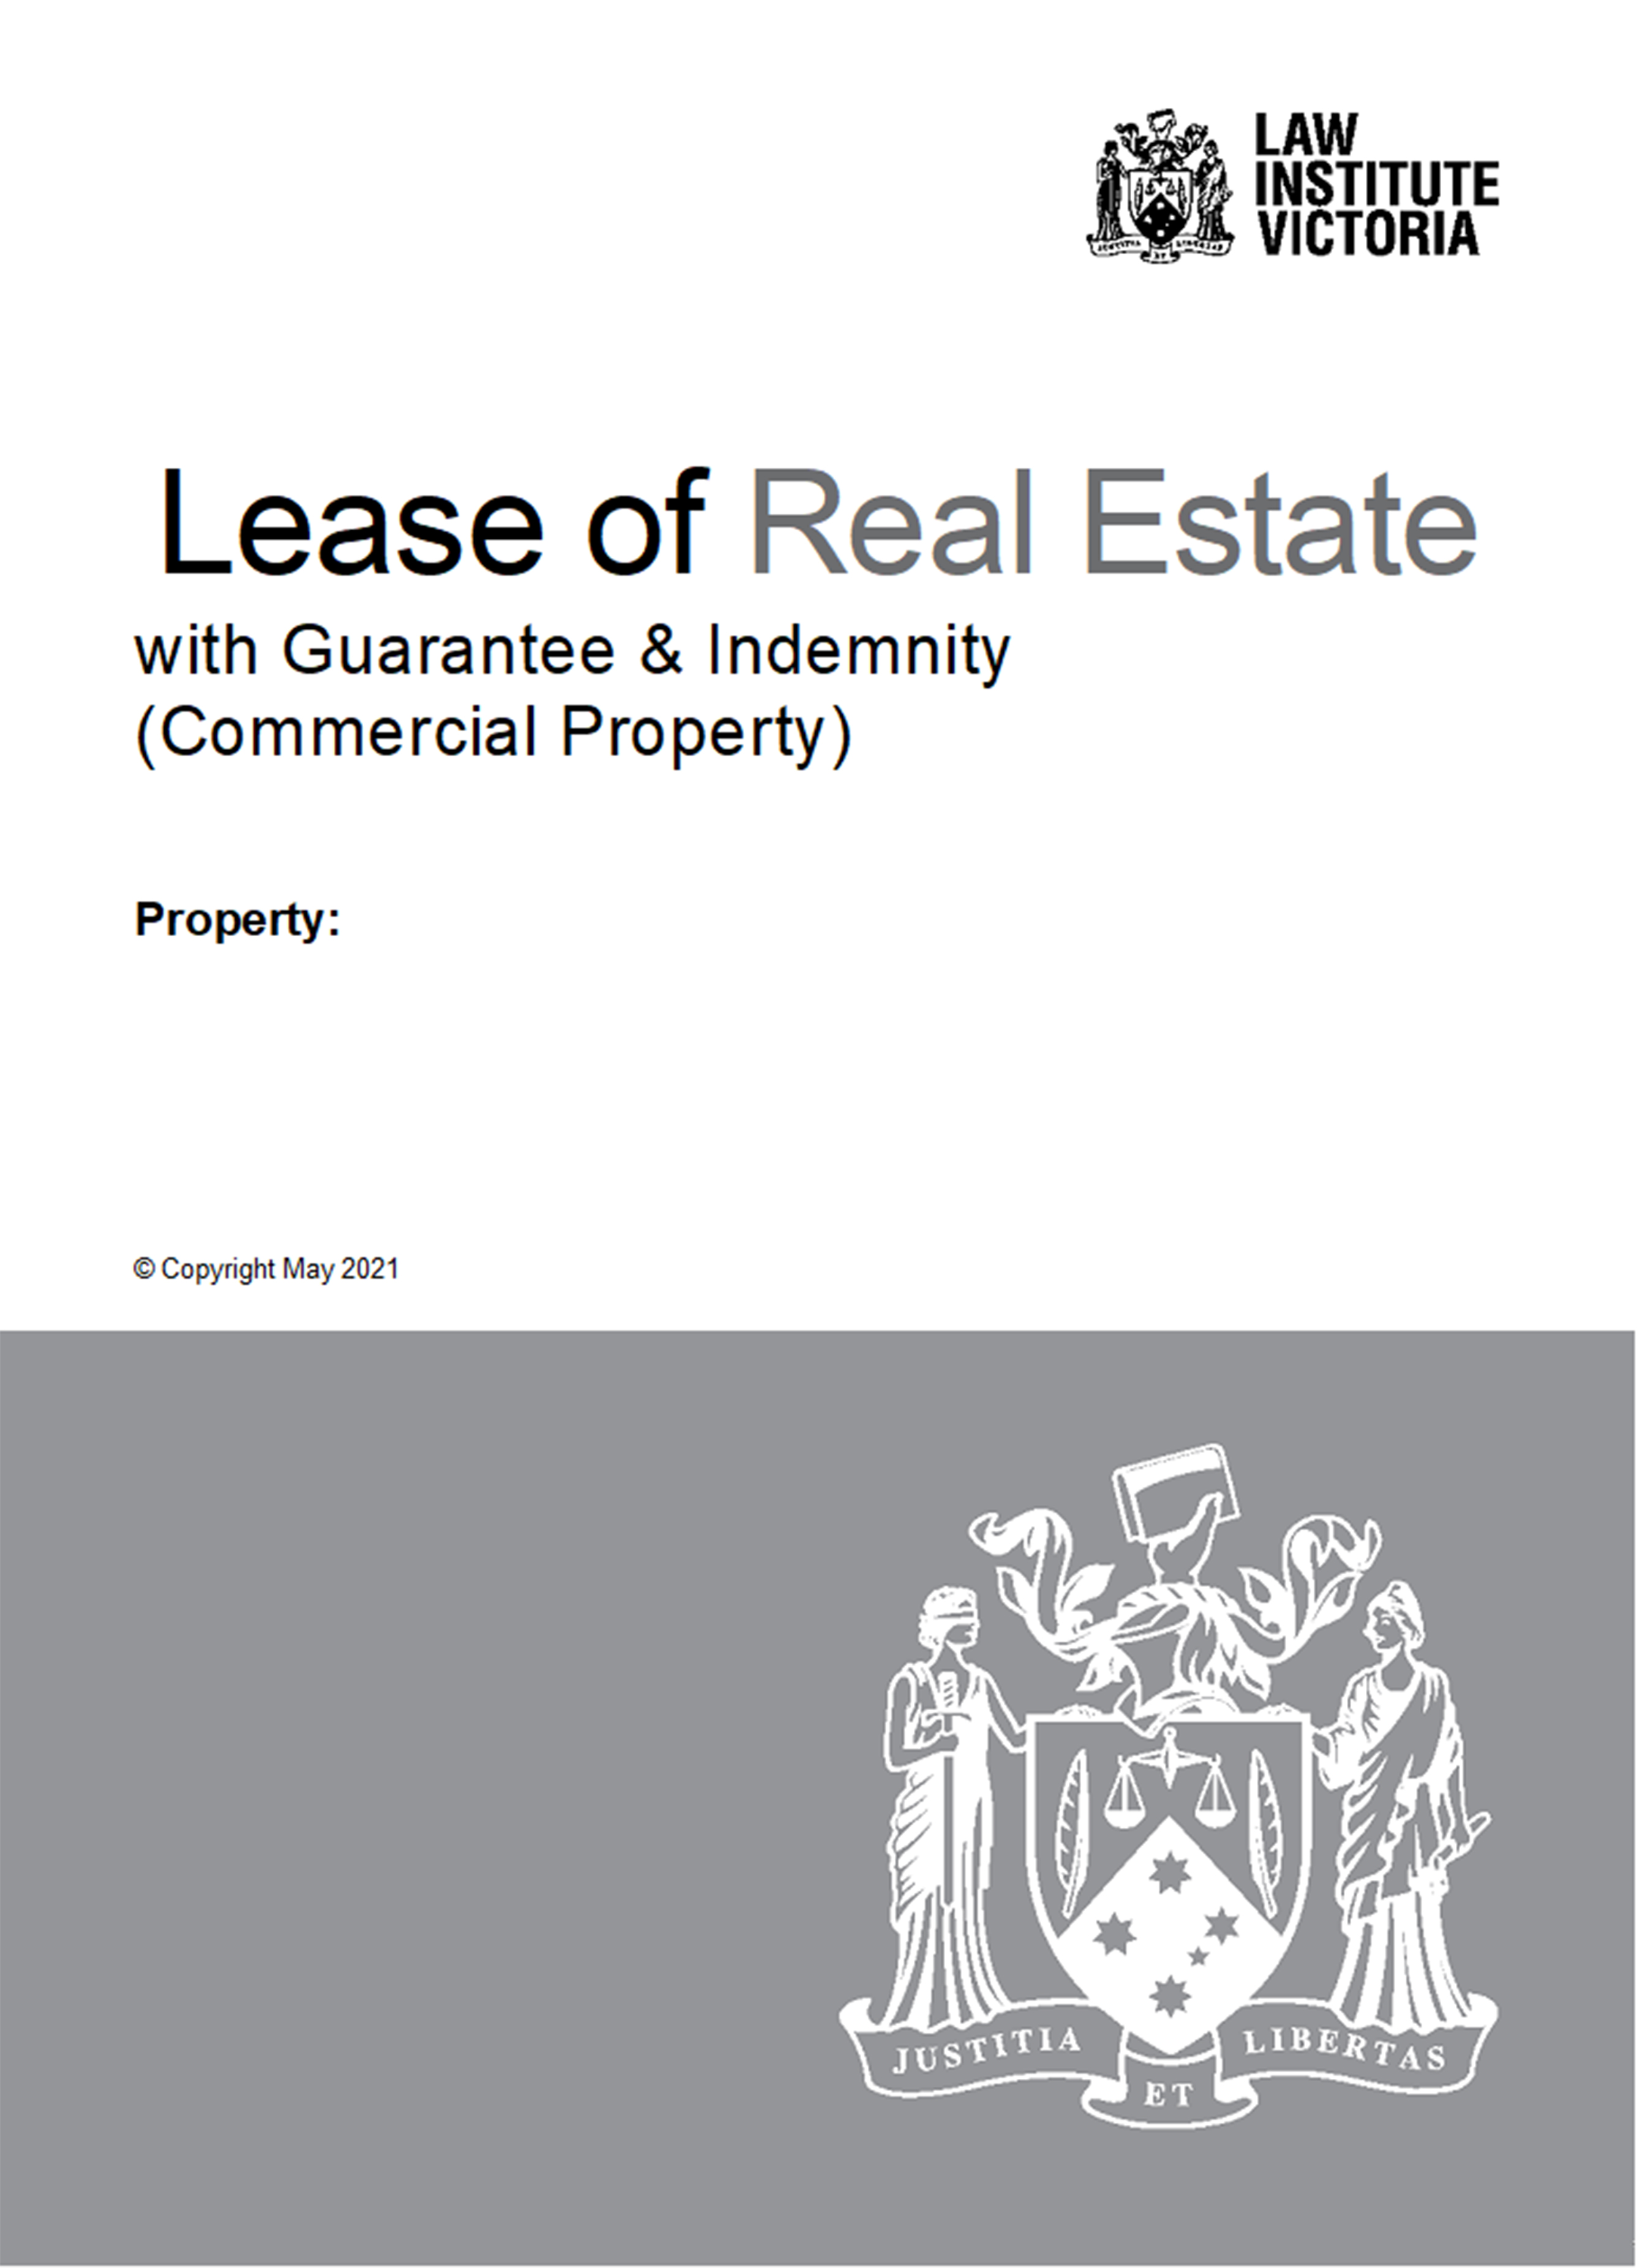 Lease of Real Estate (Commercial Property) Code 6.18